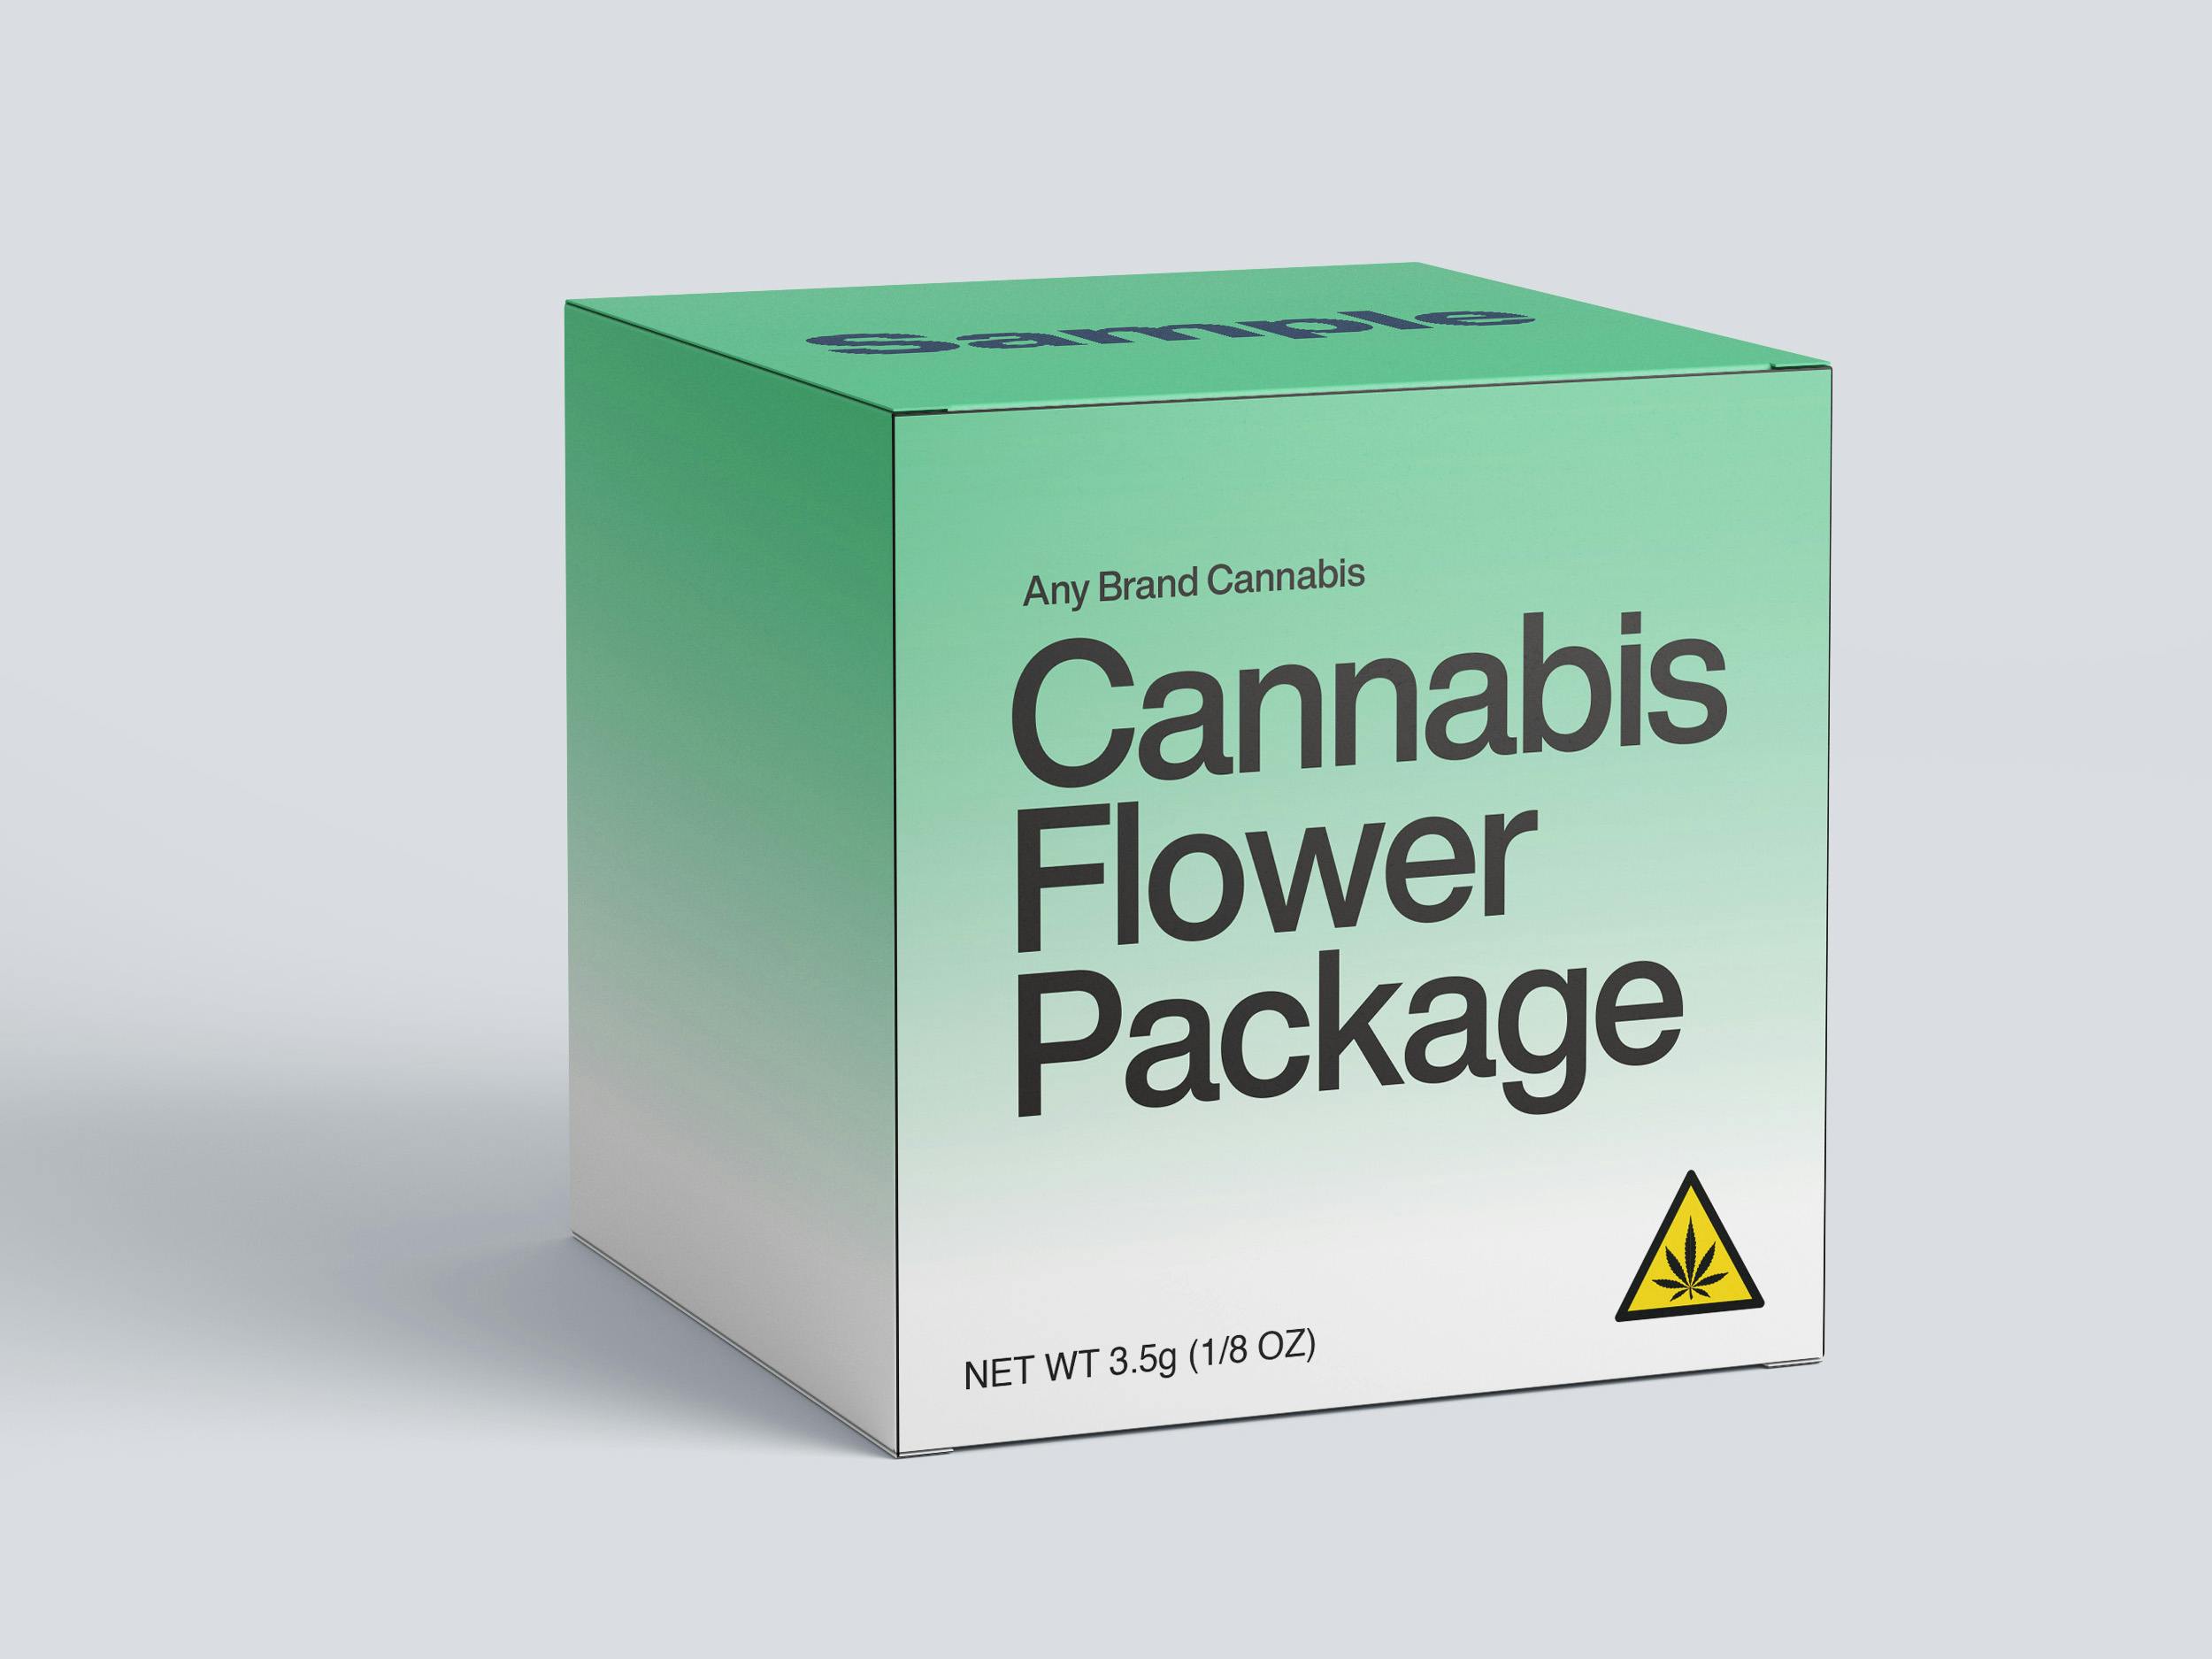 A cannabis package with the International Intoxicating Cannabis Product Symbol on it